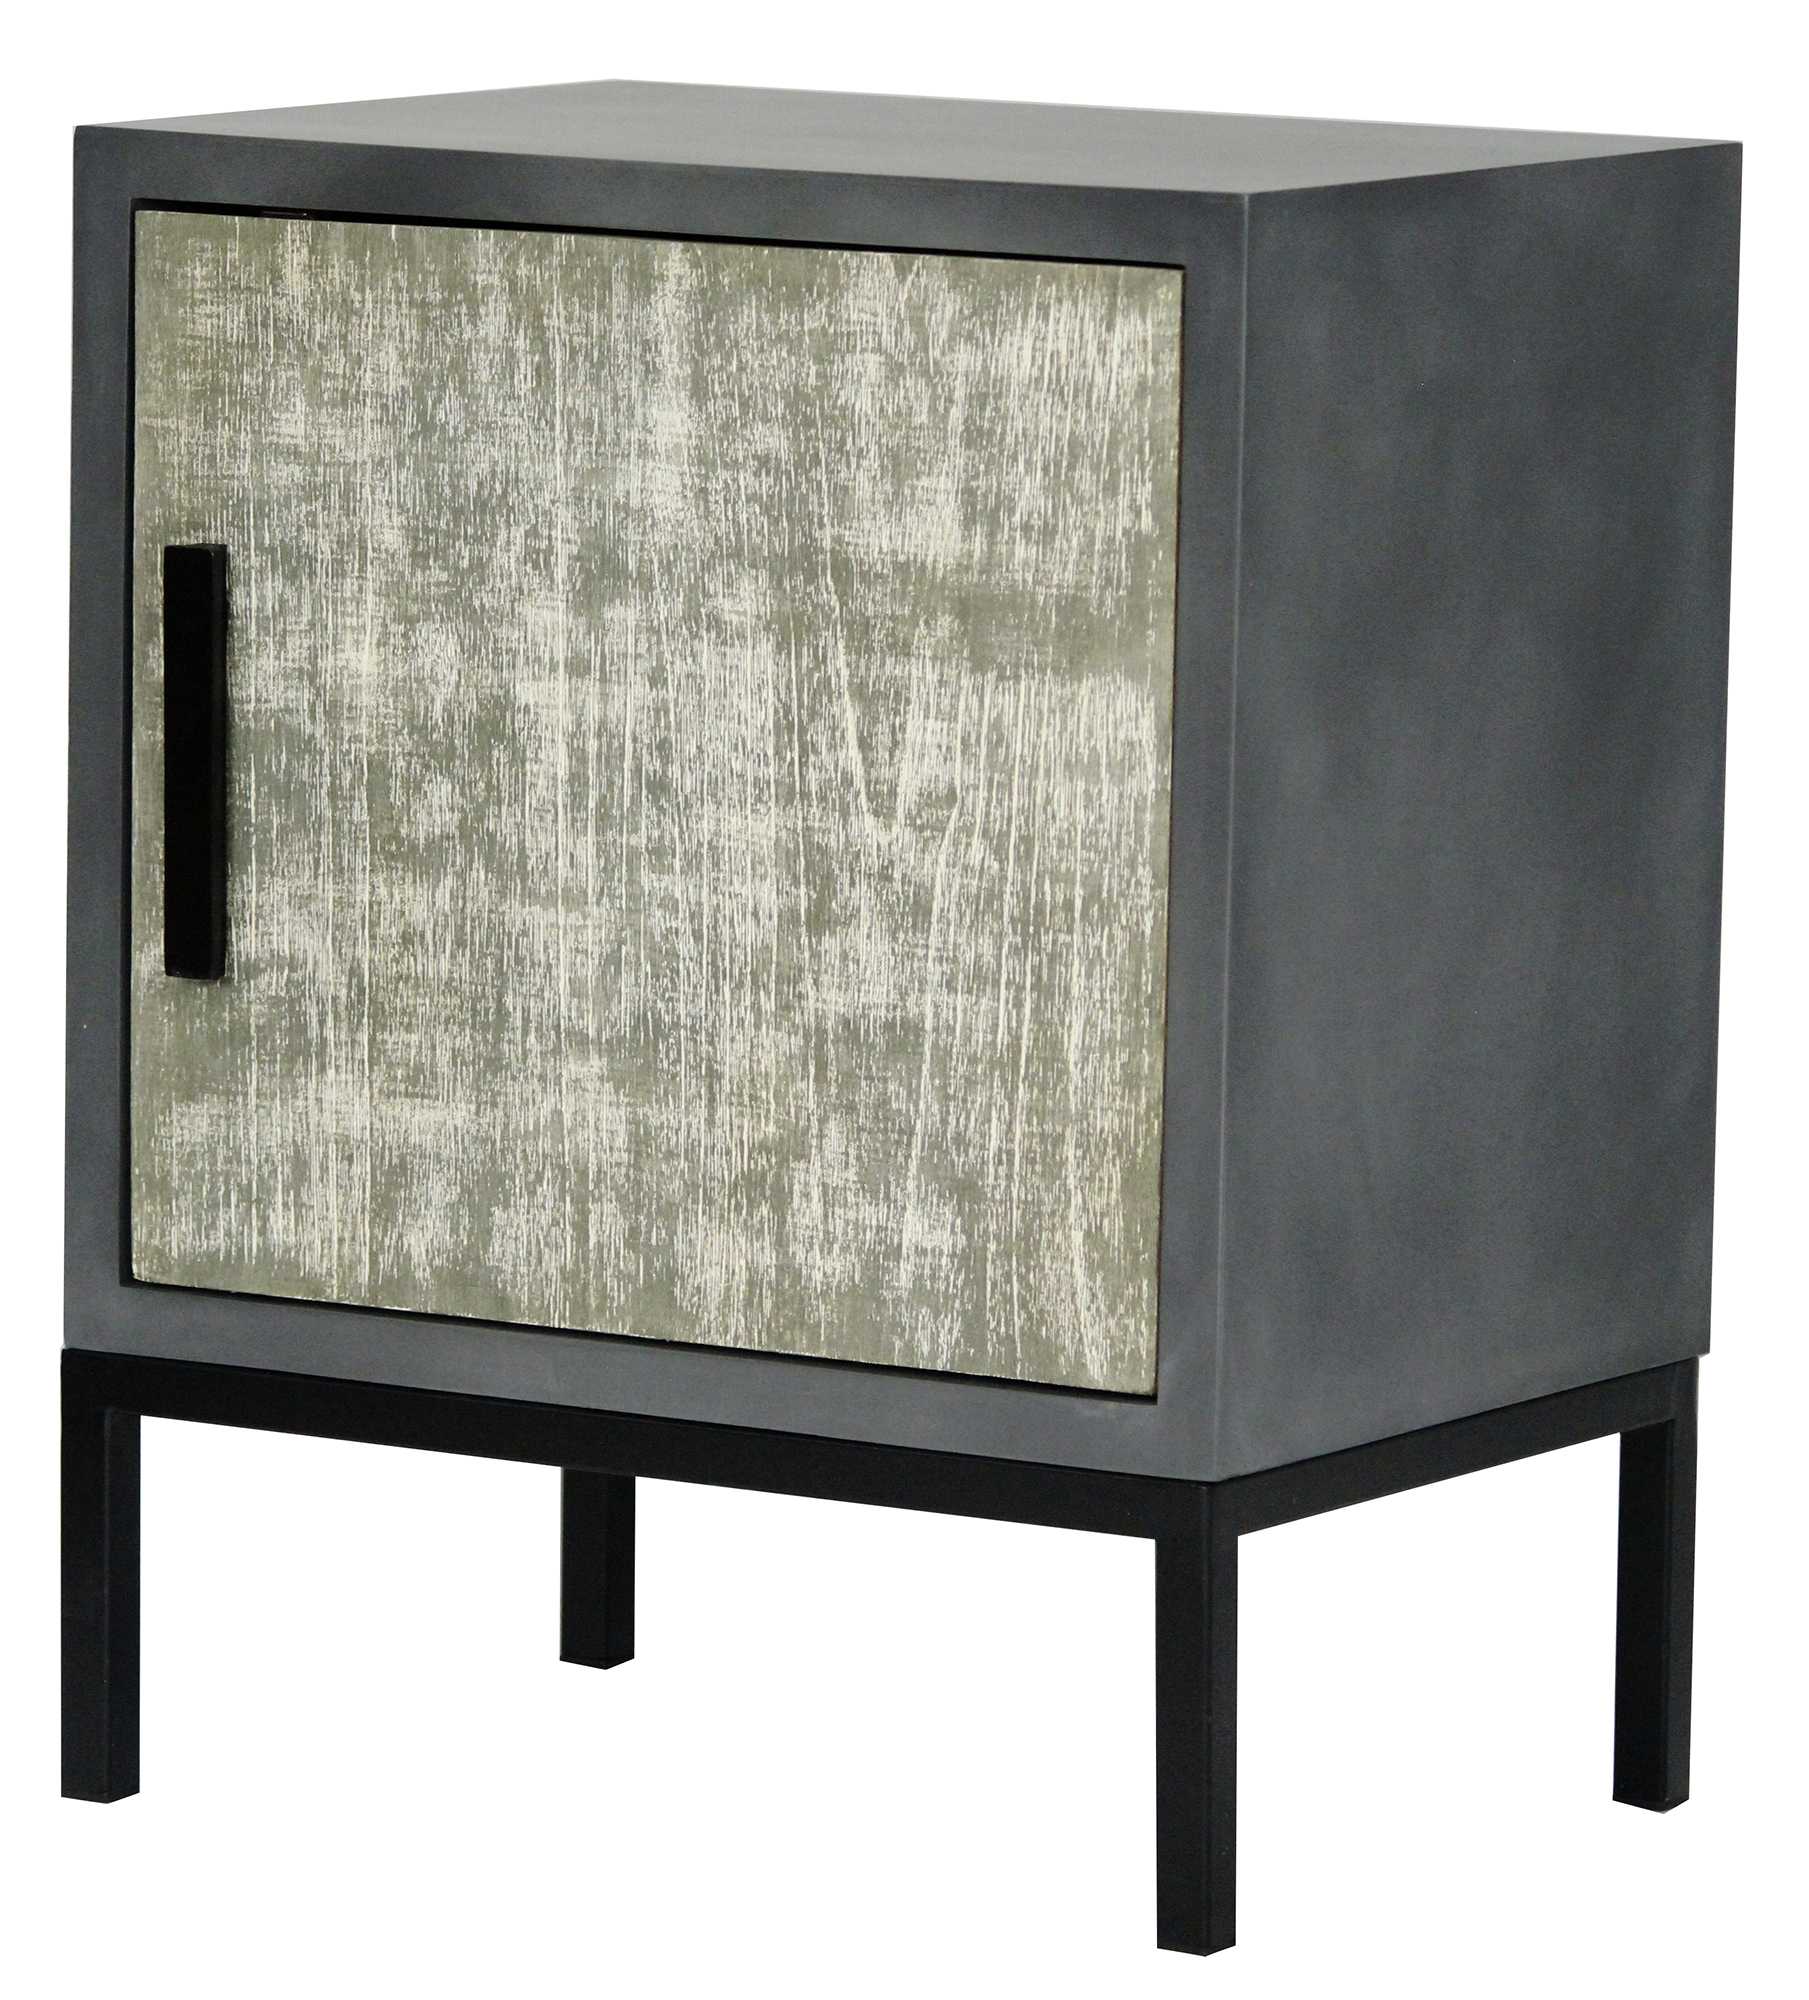 22" X 15" X 27" Gray W Distressed Gray MDF Wood Iron Accent Cabinet with a Door